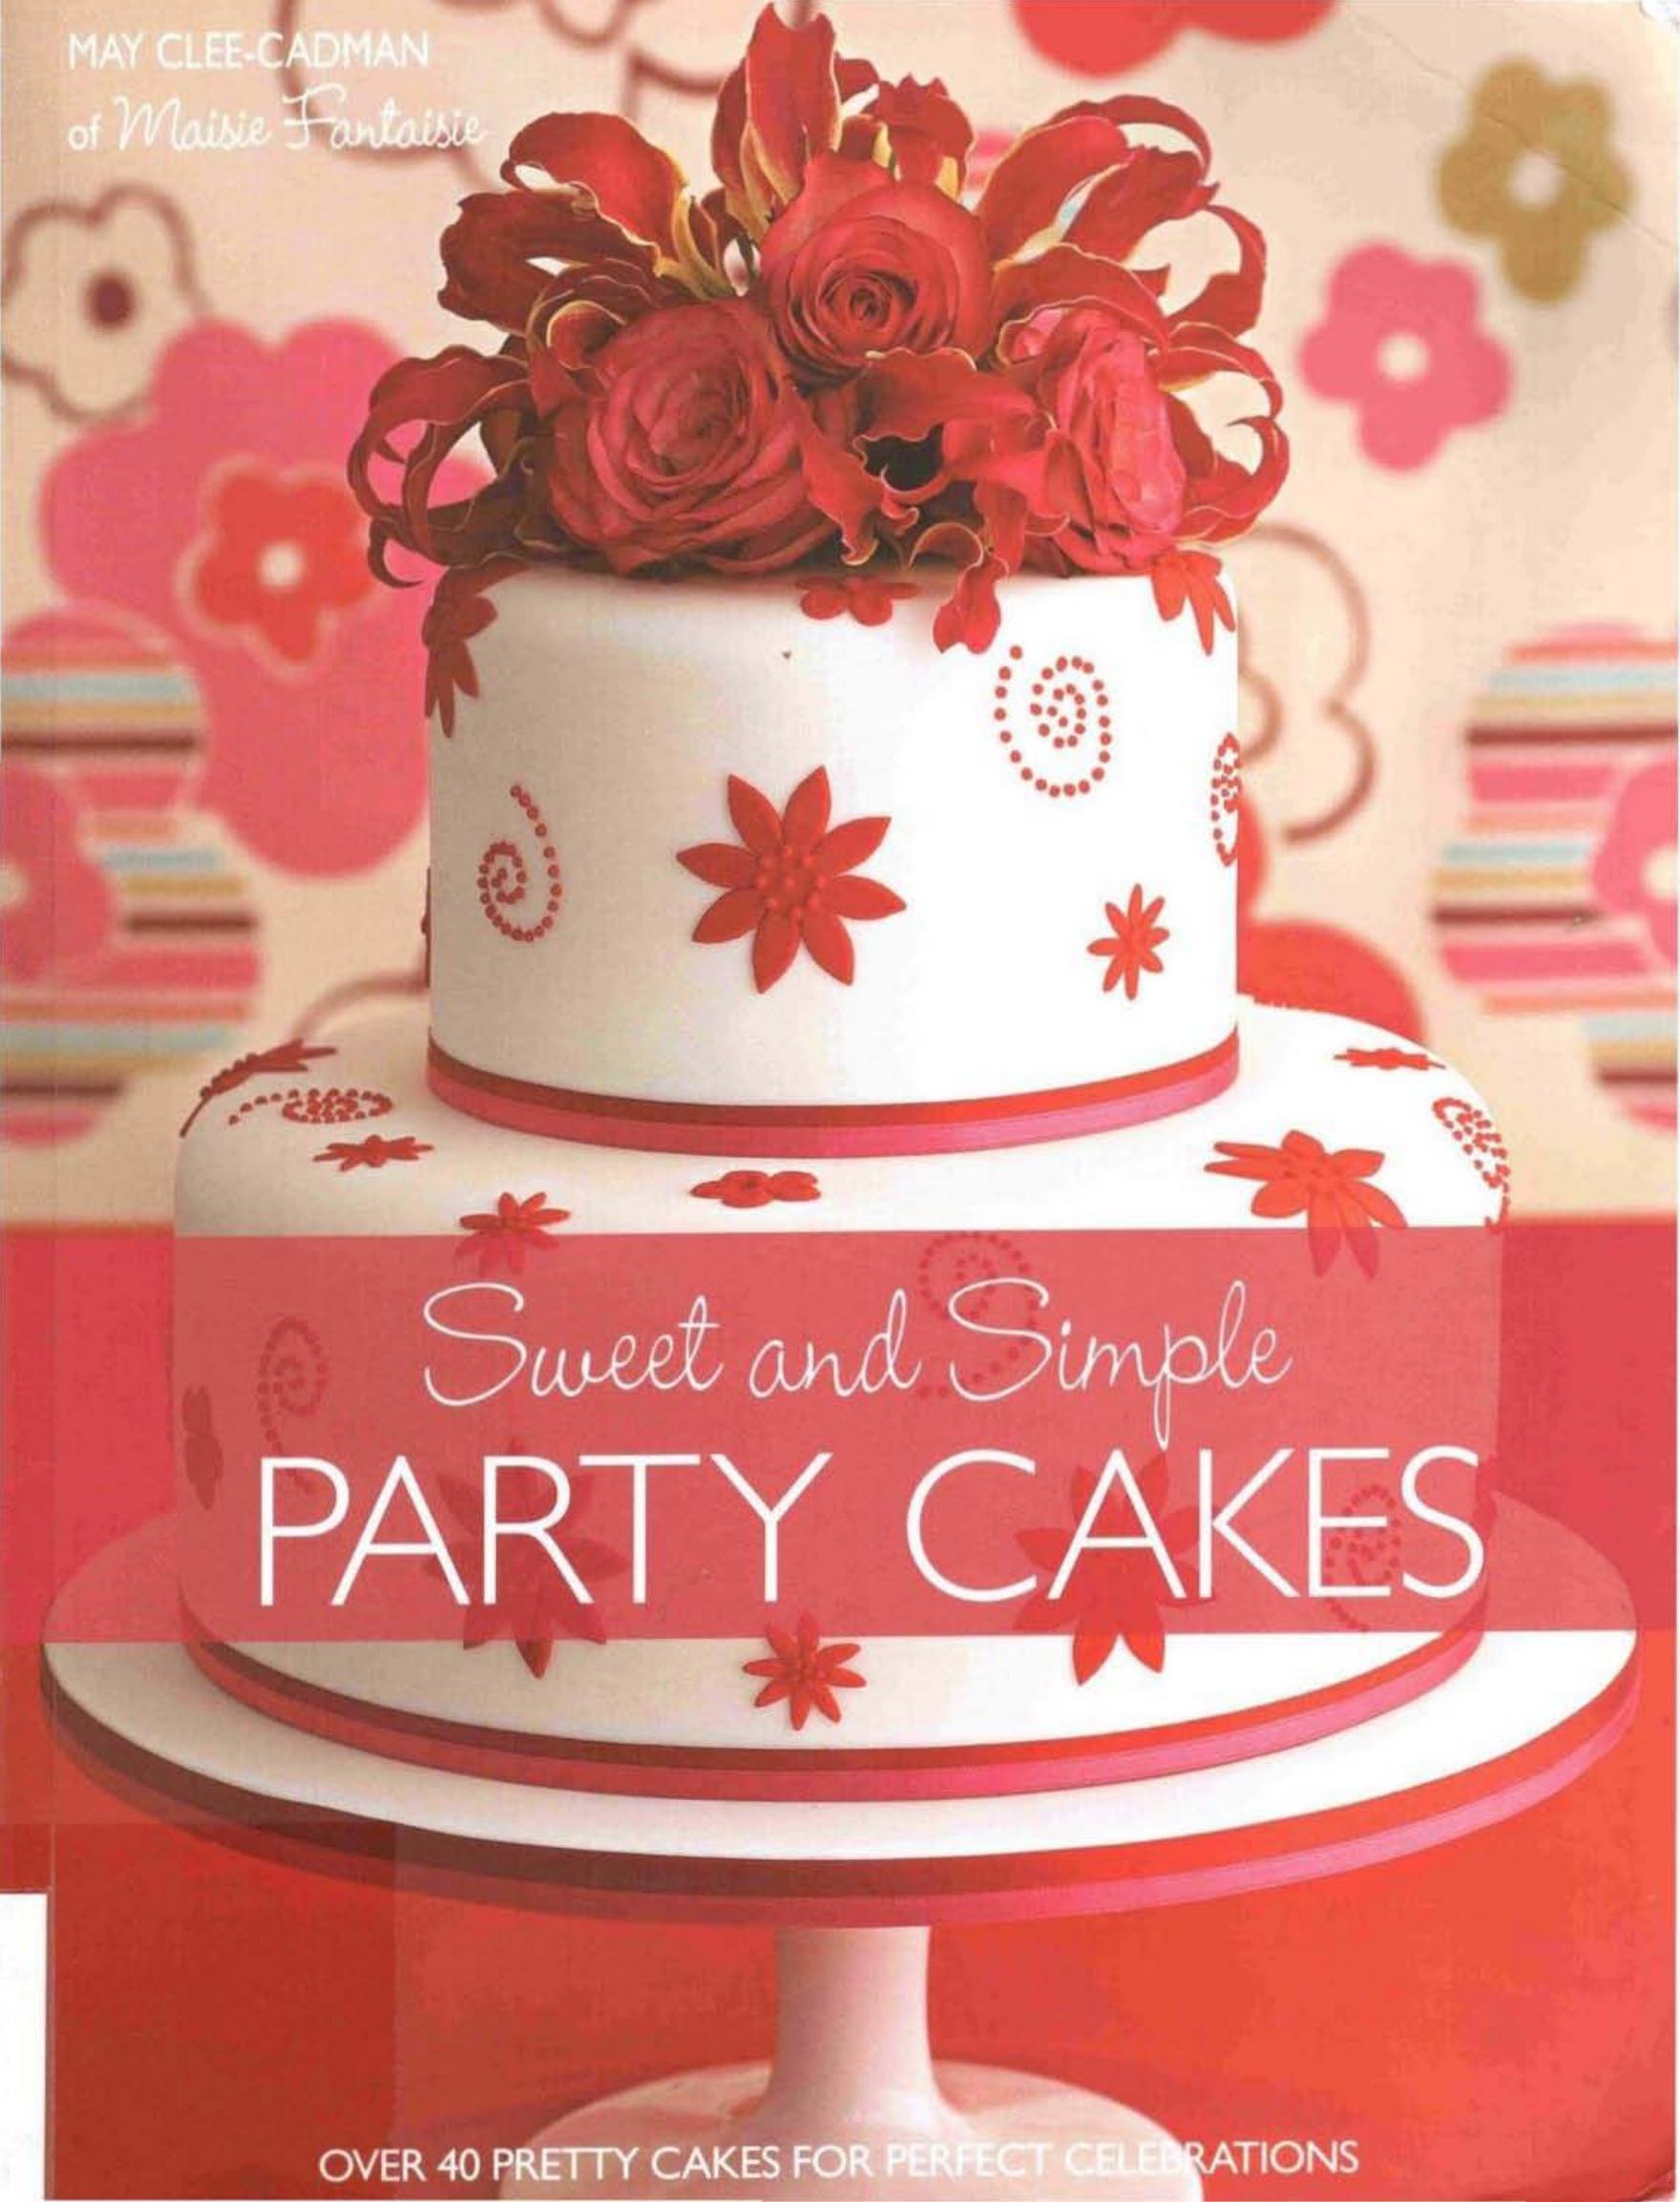 Sweet And Simple Party Cakes by May Clee Cadman